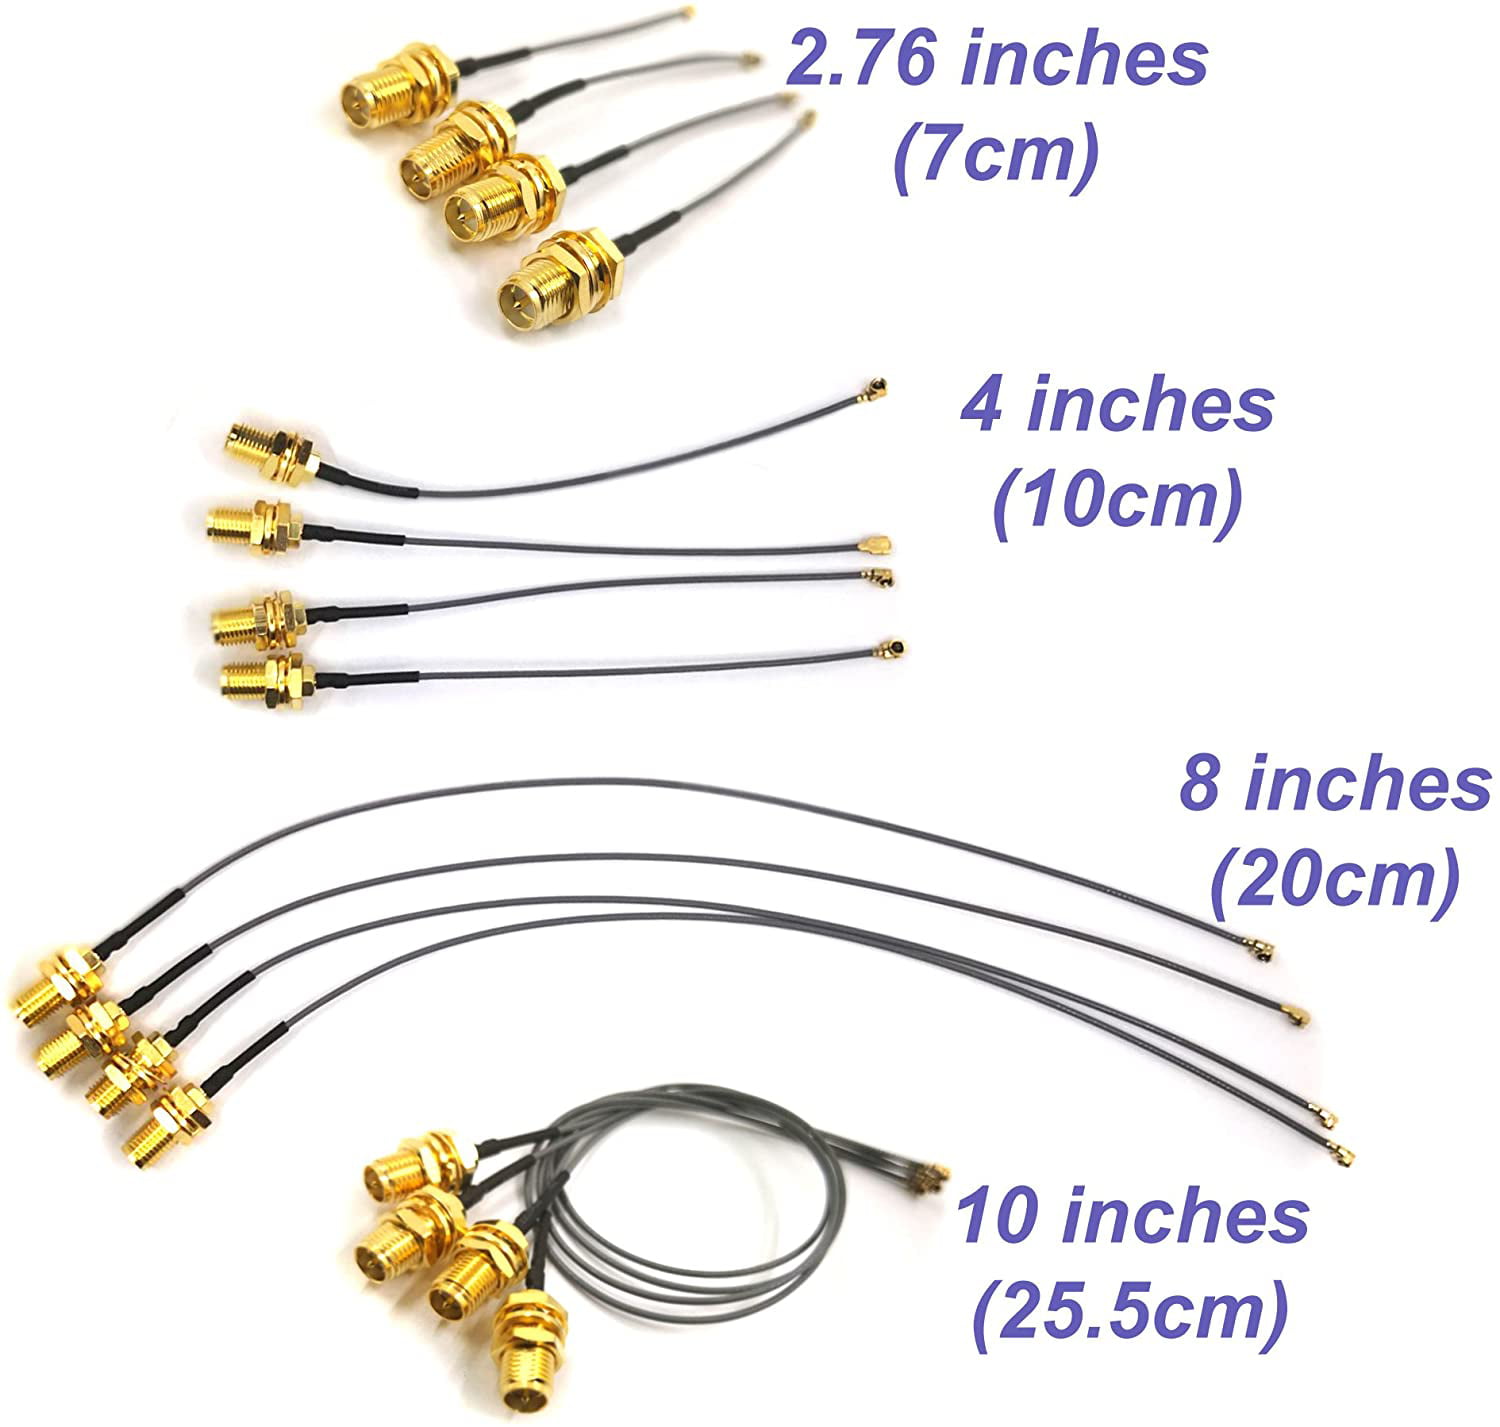 IPEX/IPX Pack of 4 RF U.FL Mini PCI to RP-SMA Female Pigtail Antenna Wi-Fi Low Loss Coaxial Cable 1.13mm 7 cm 2.76 inches 